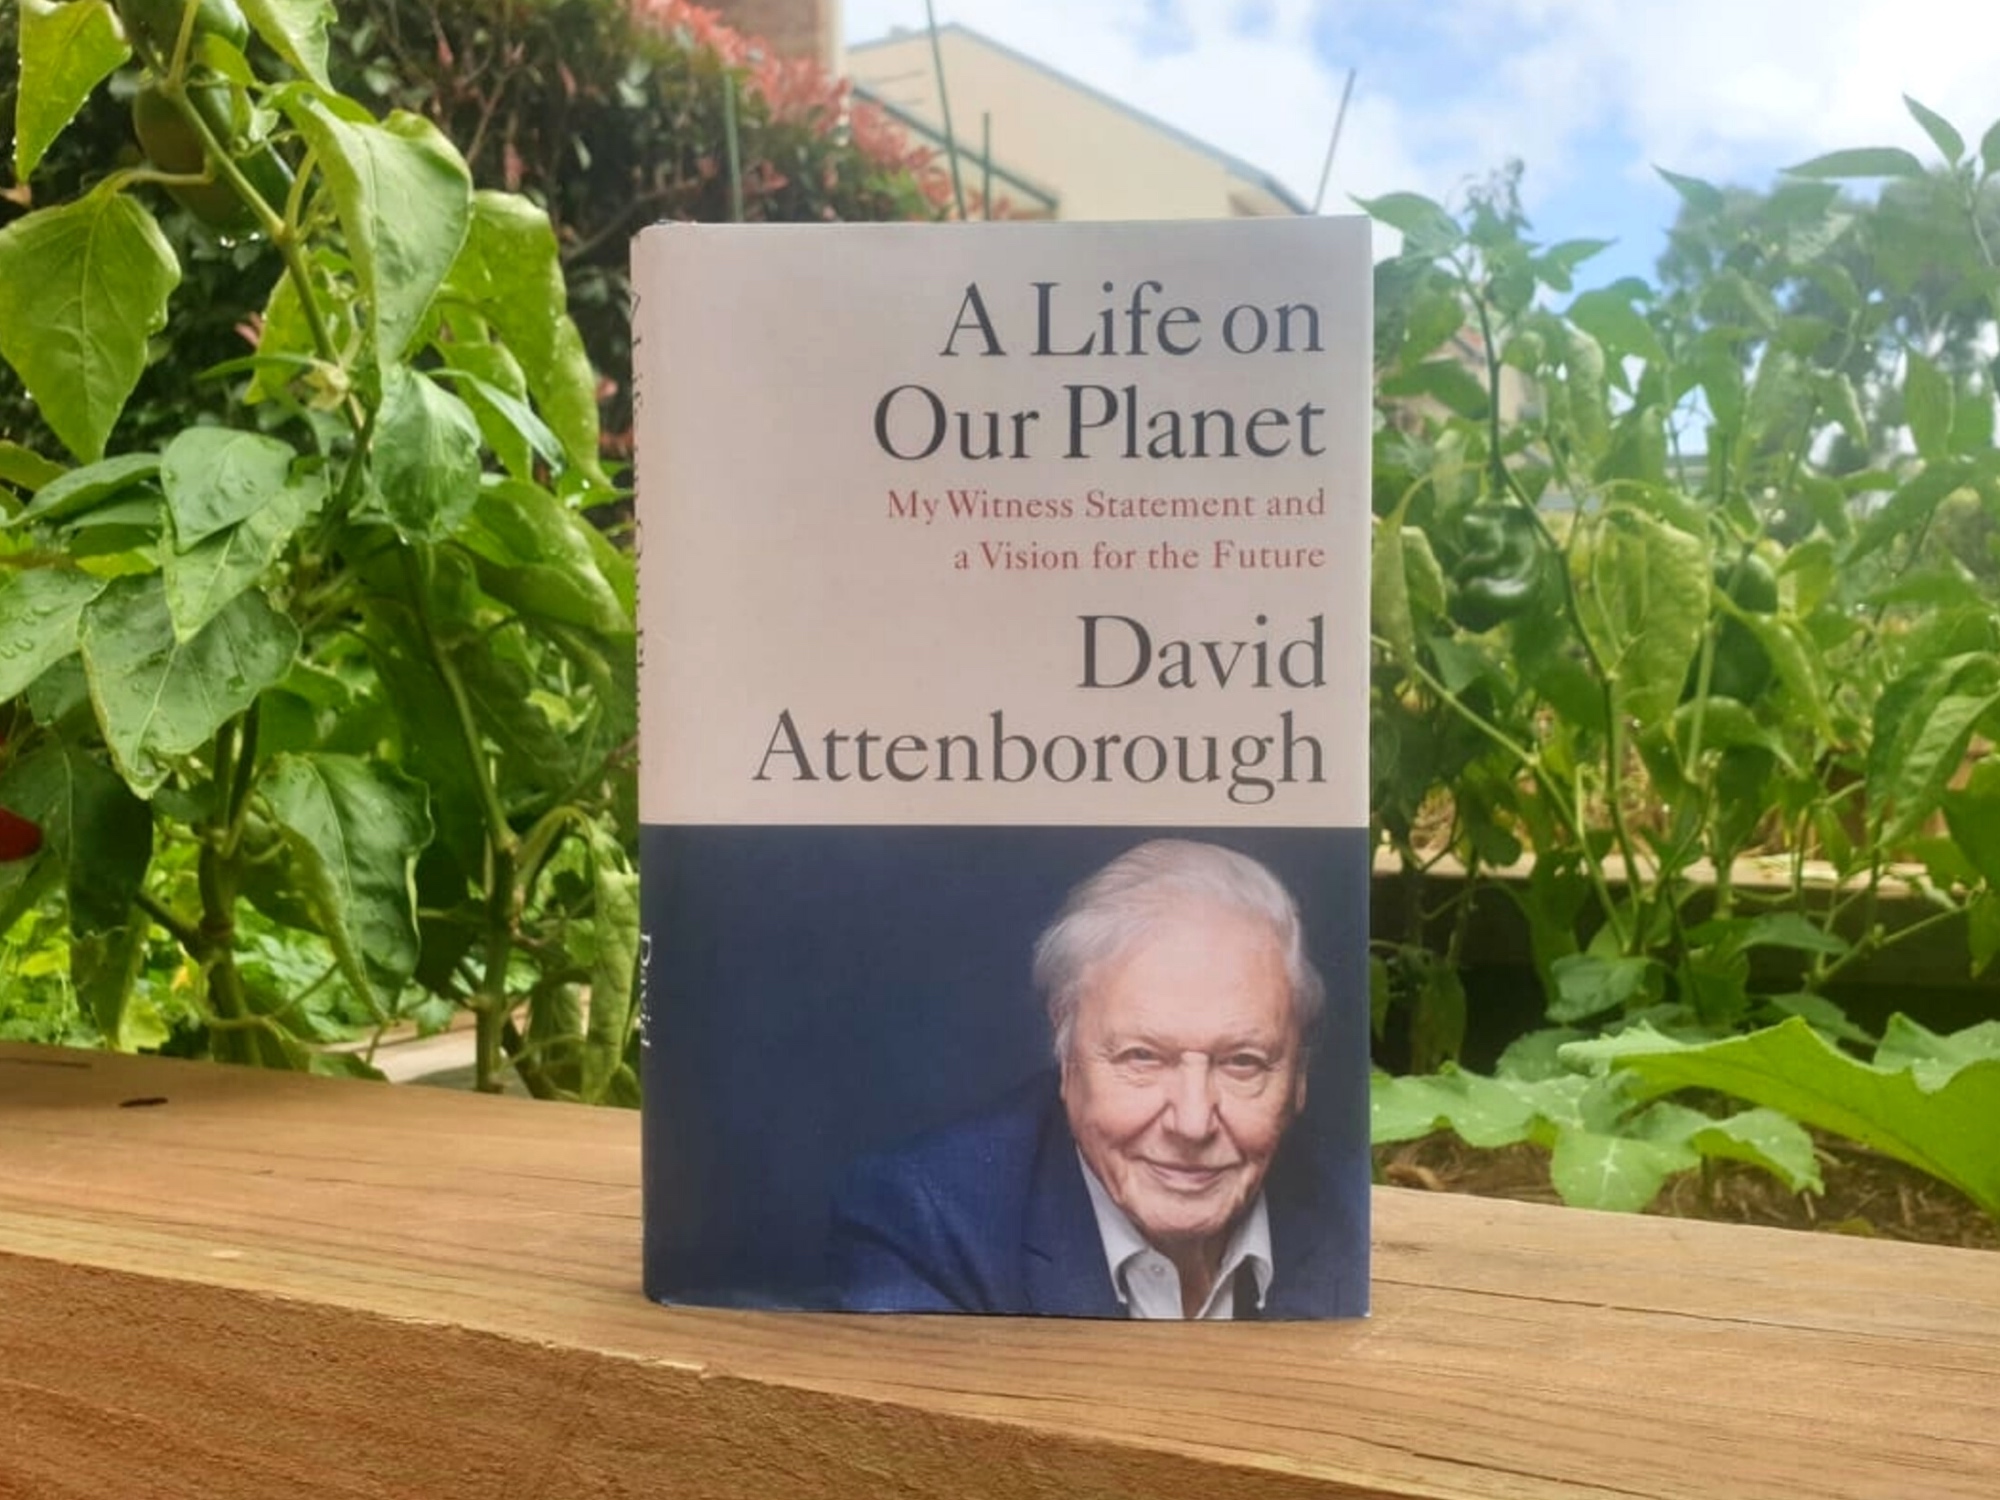 Cover of David Attenborough's book, A Life on Our Planet